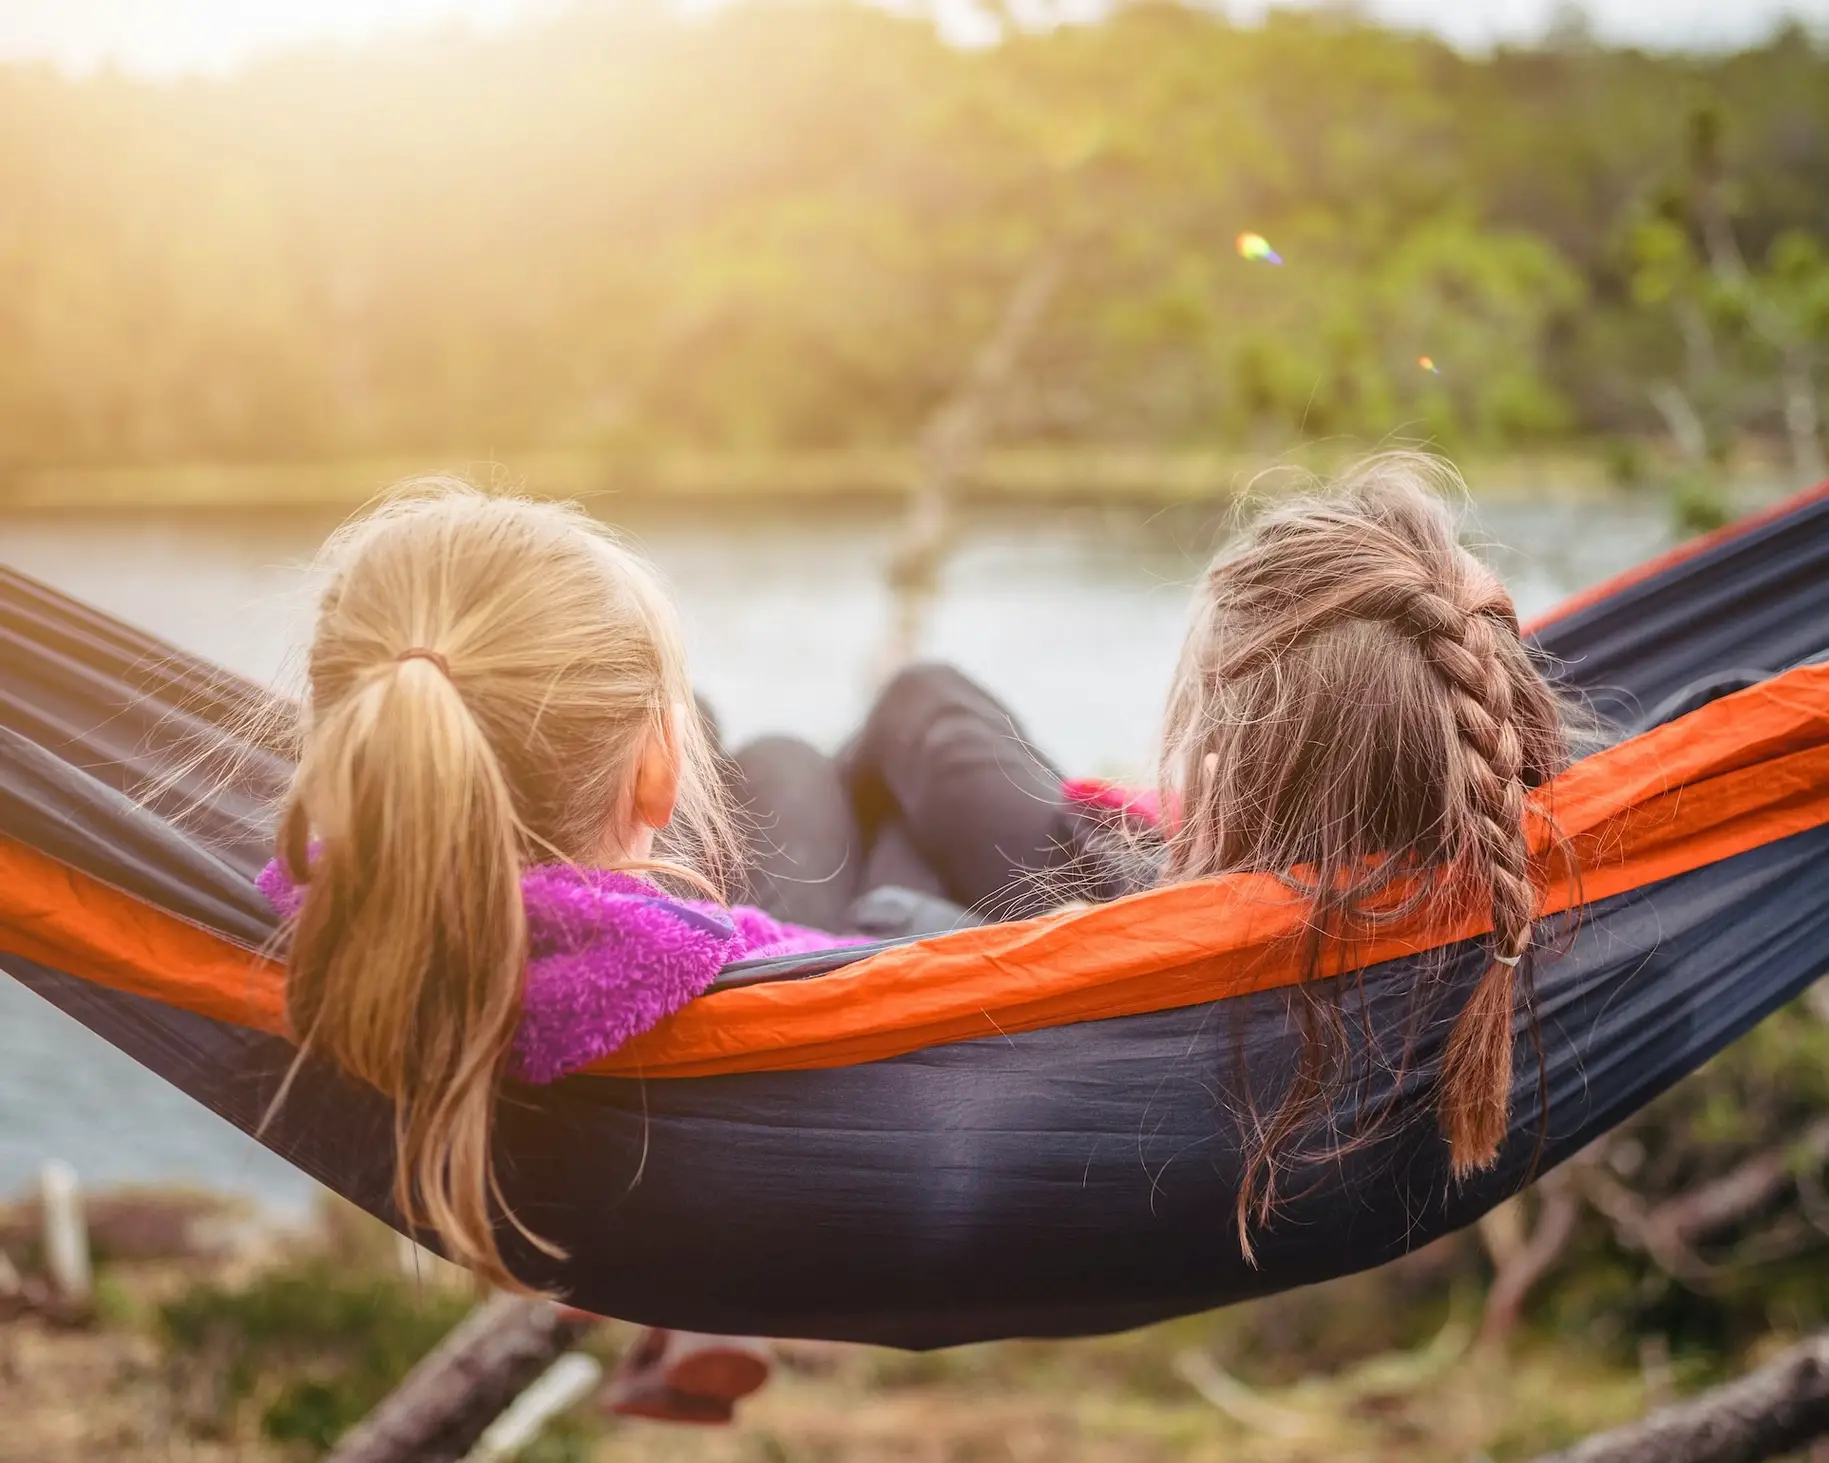 This is an image of two sisters sitting together in a hammock.